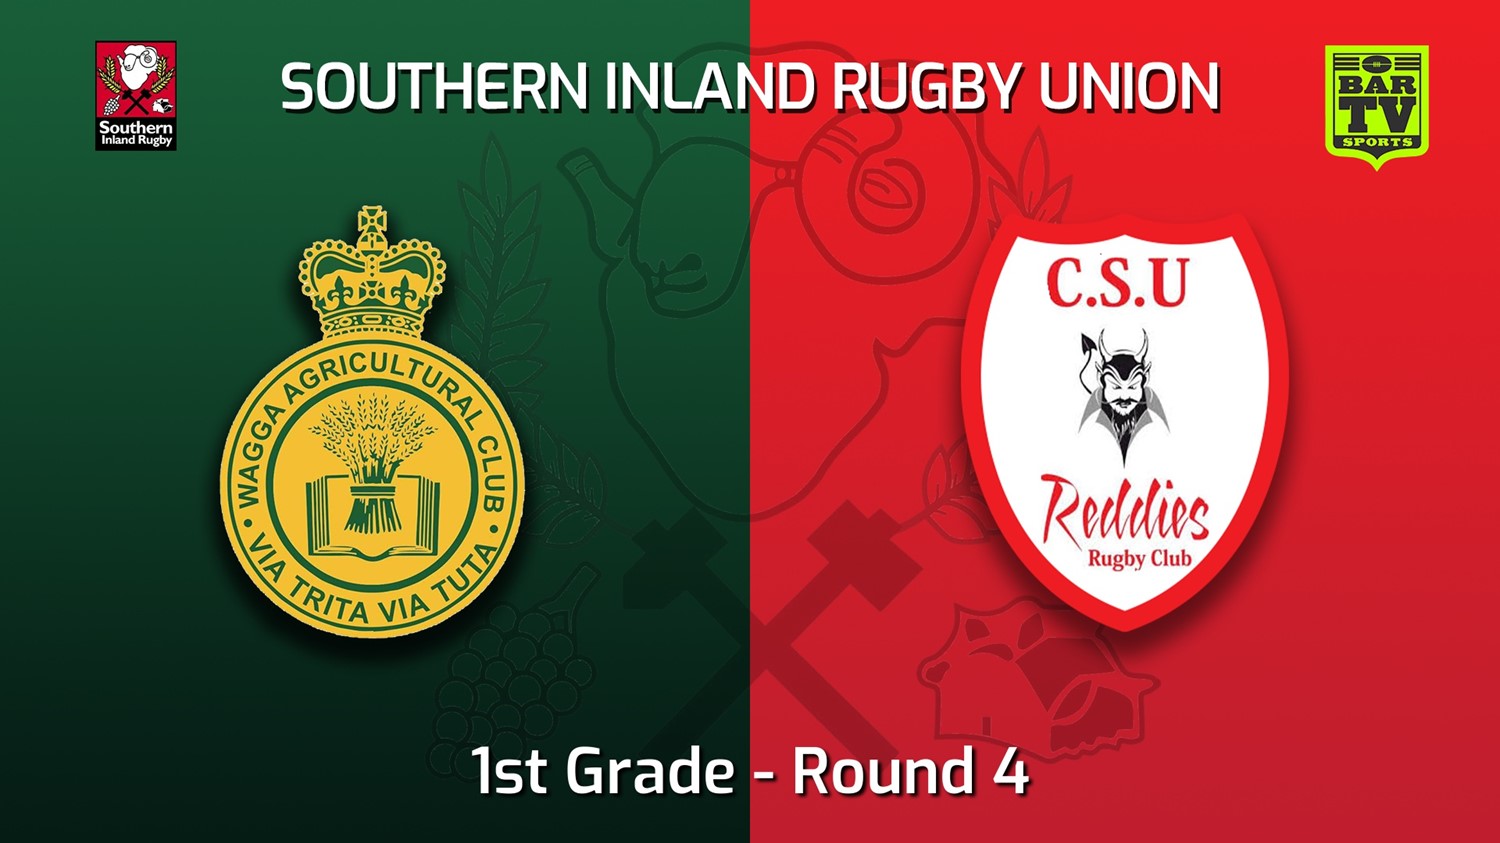 220430-Southern Inland Rugby Union Round 4 - 1st Grade - Wagga Agricultural College v CSU Reddies Slate Image